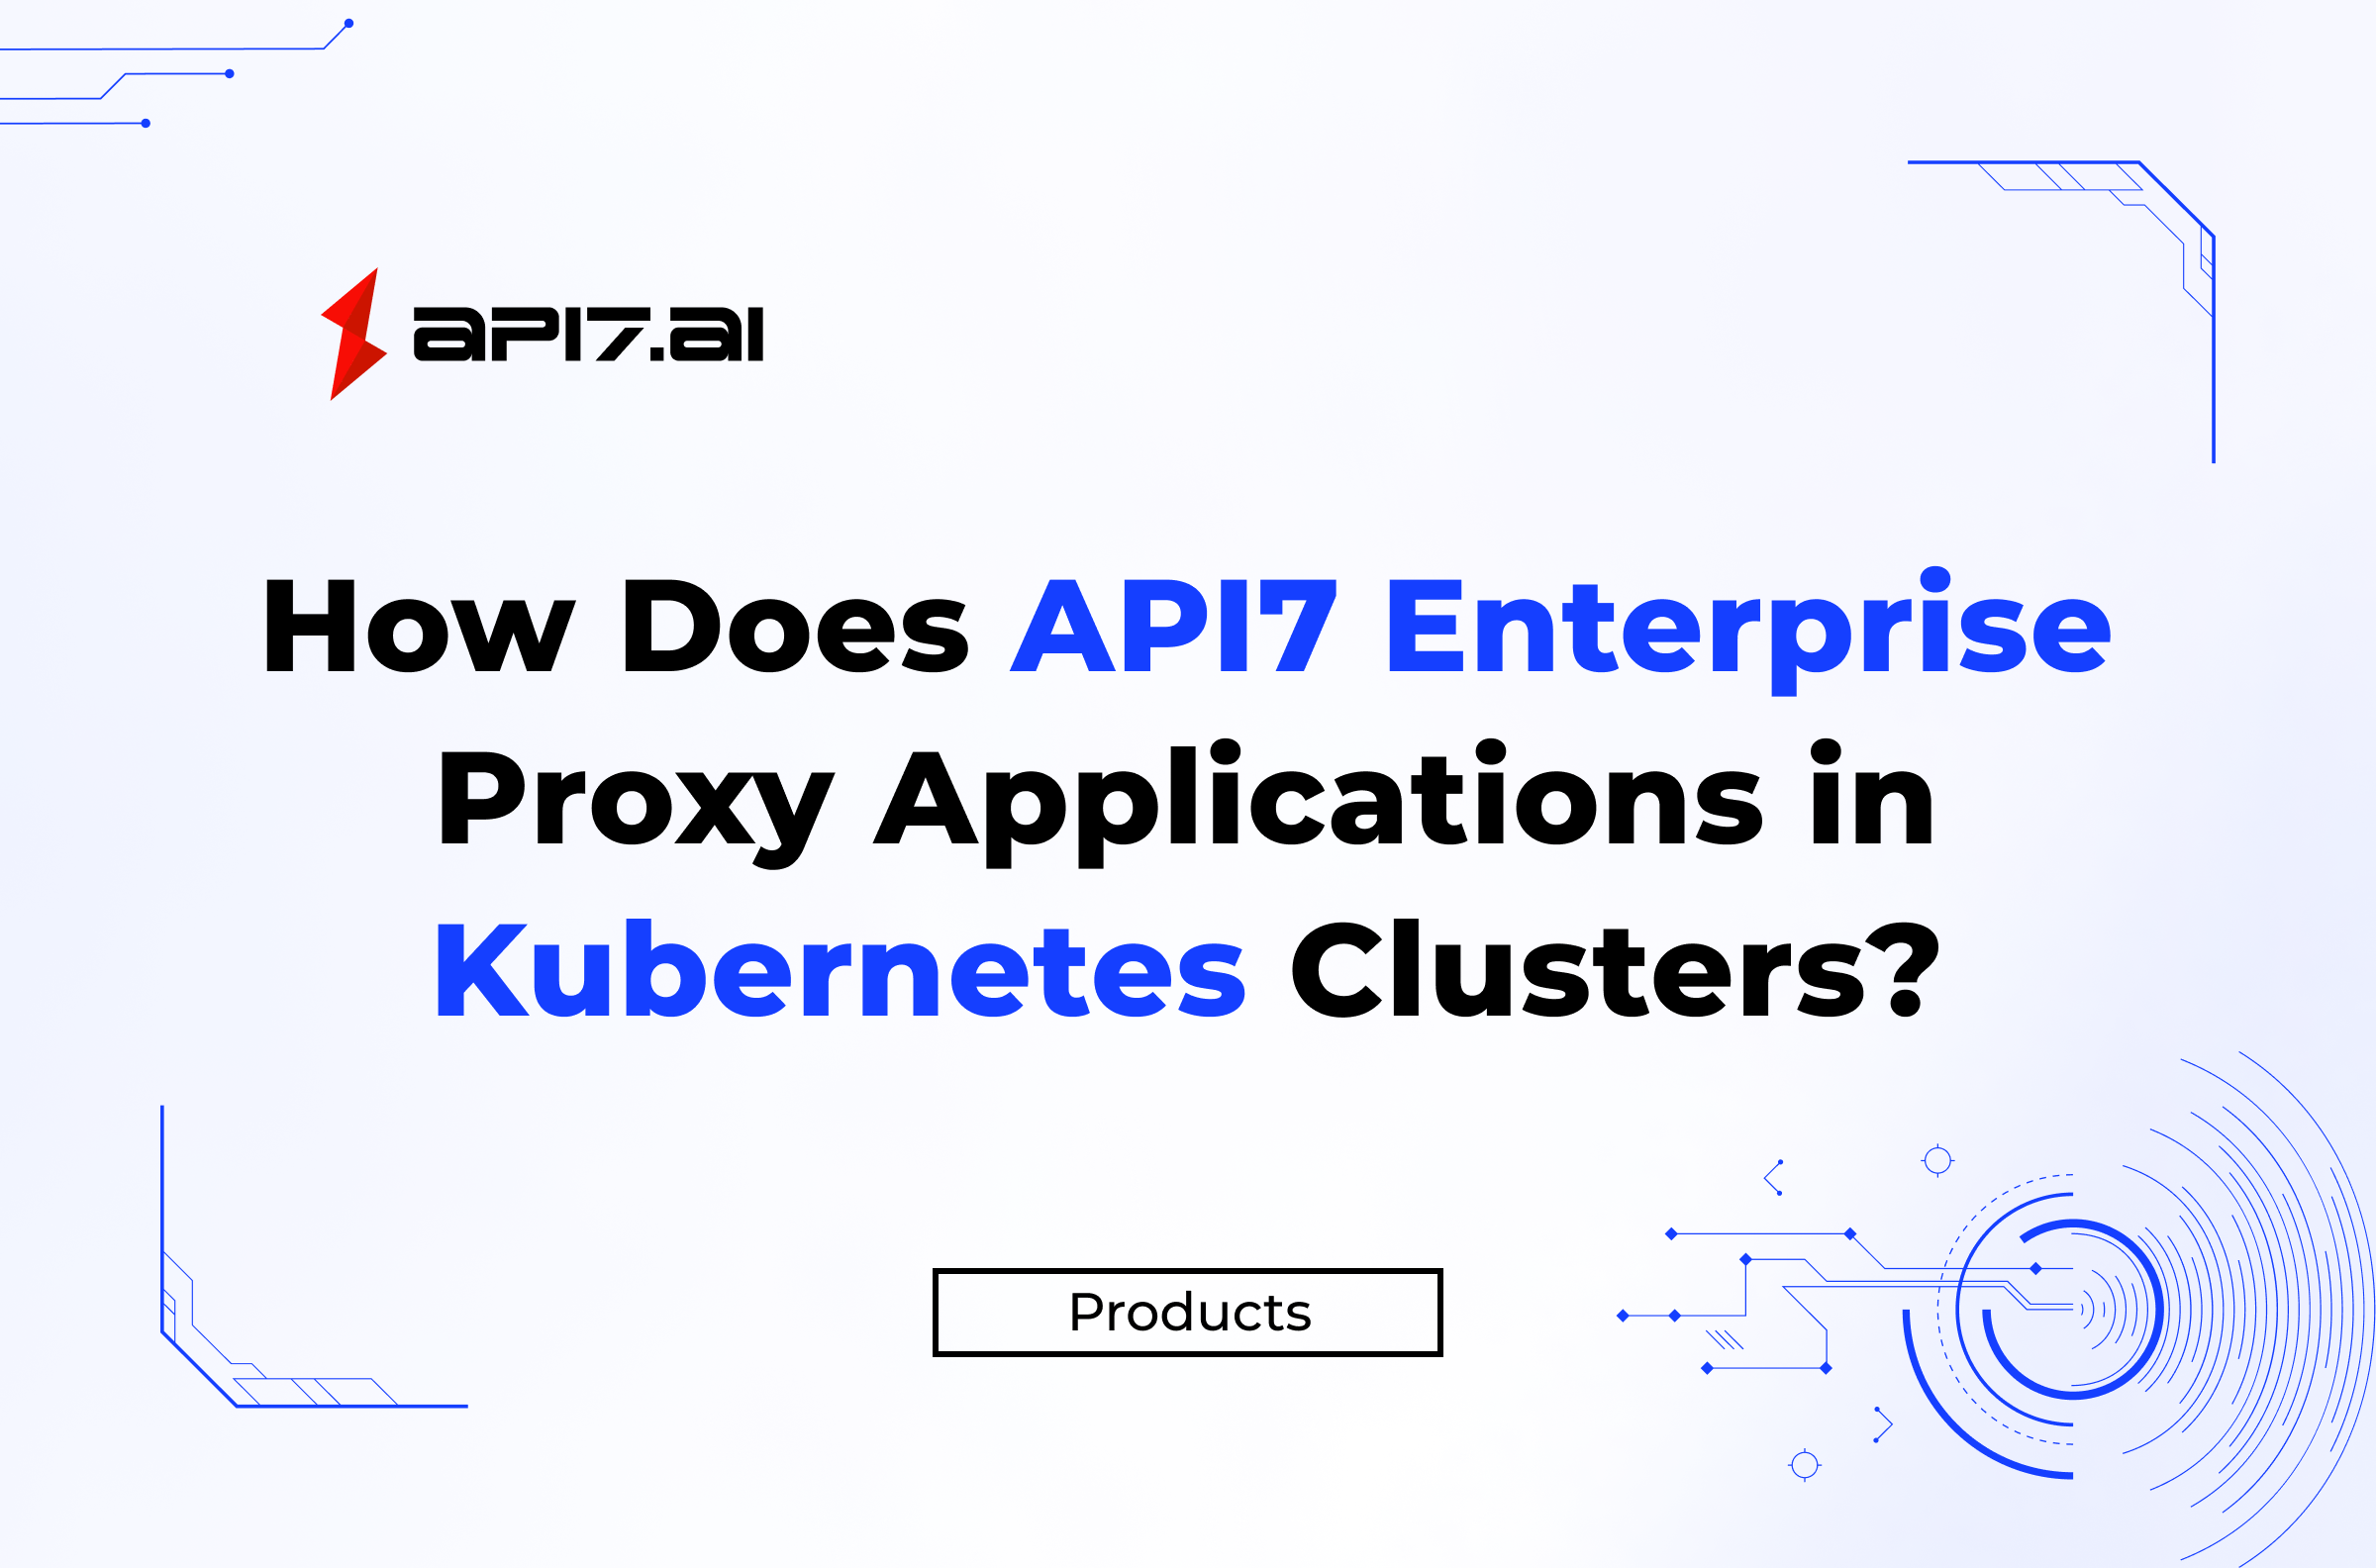 How Does API7 Enterprise Proxy Applications in Kubernetes Clusters?